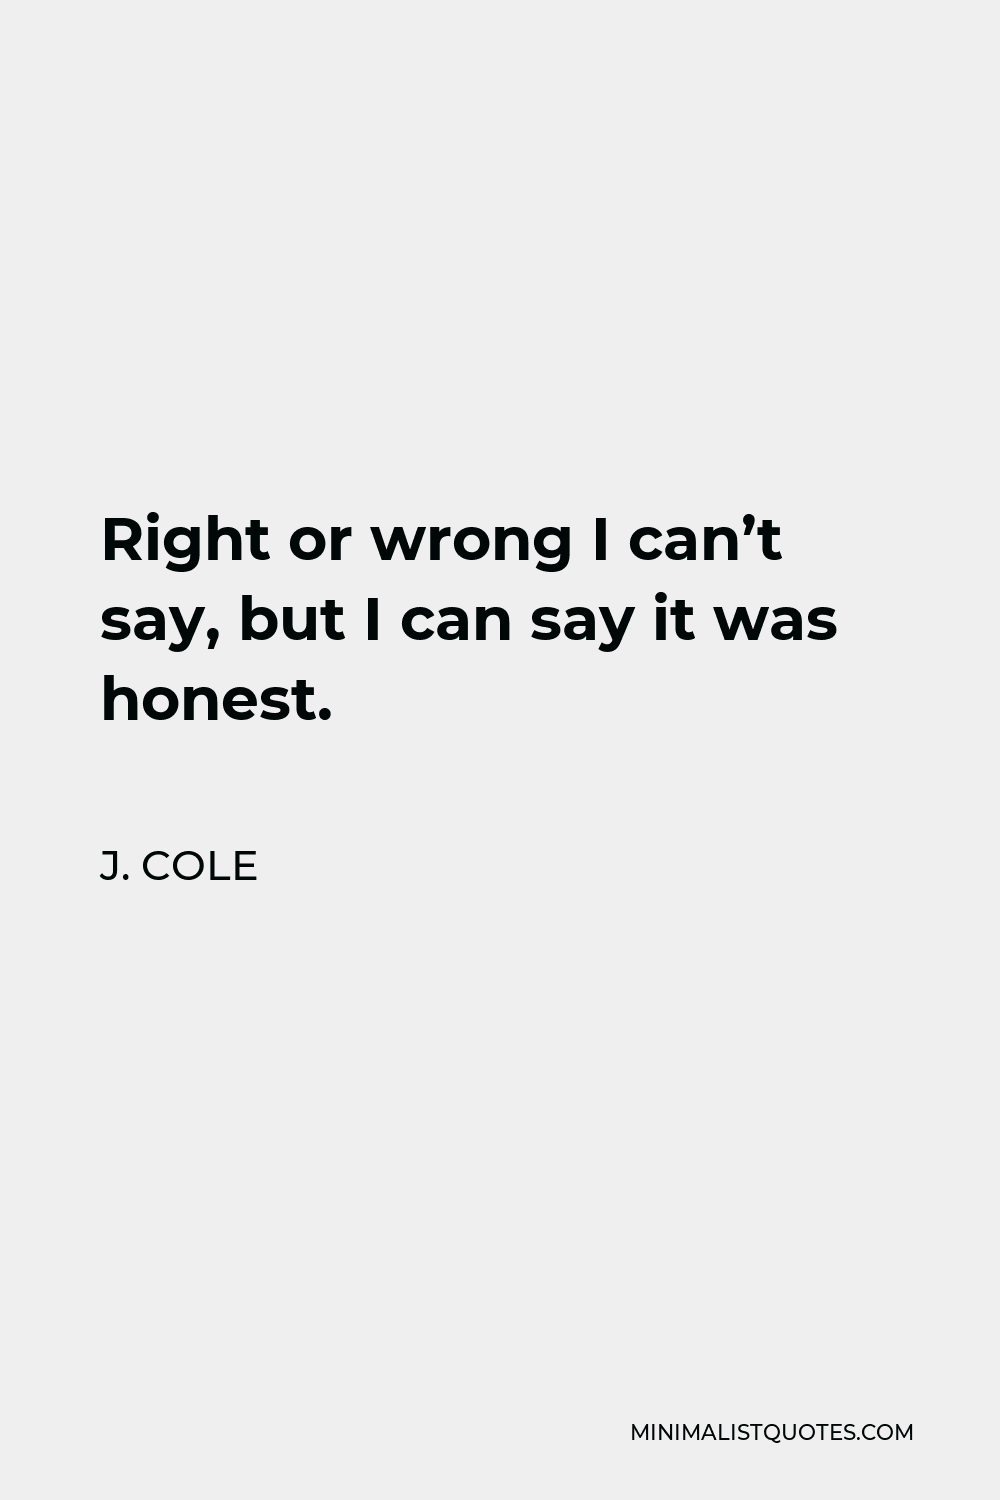 J. Cole Quote - Right or wrong I can’t say, but I can say it was honest.